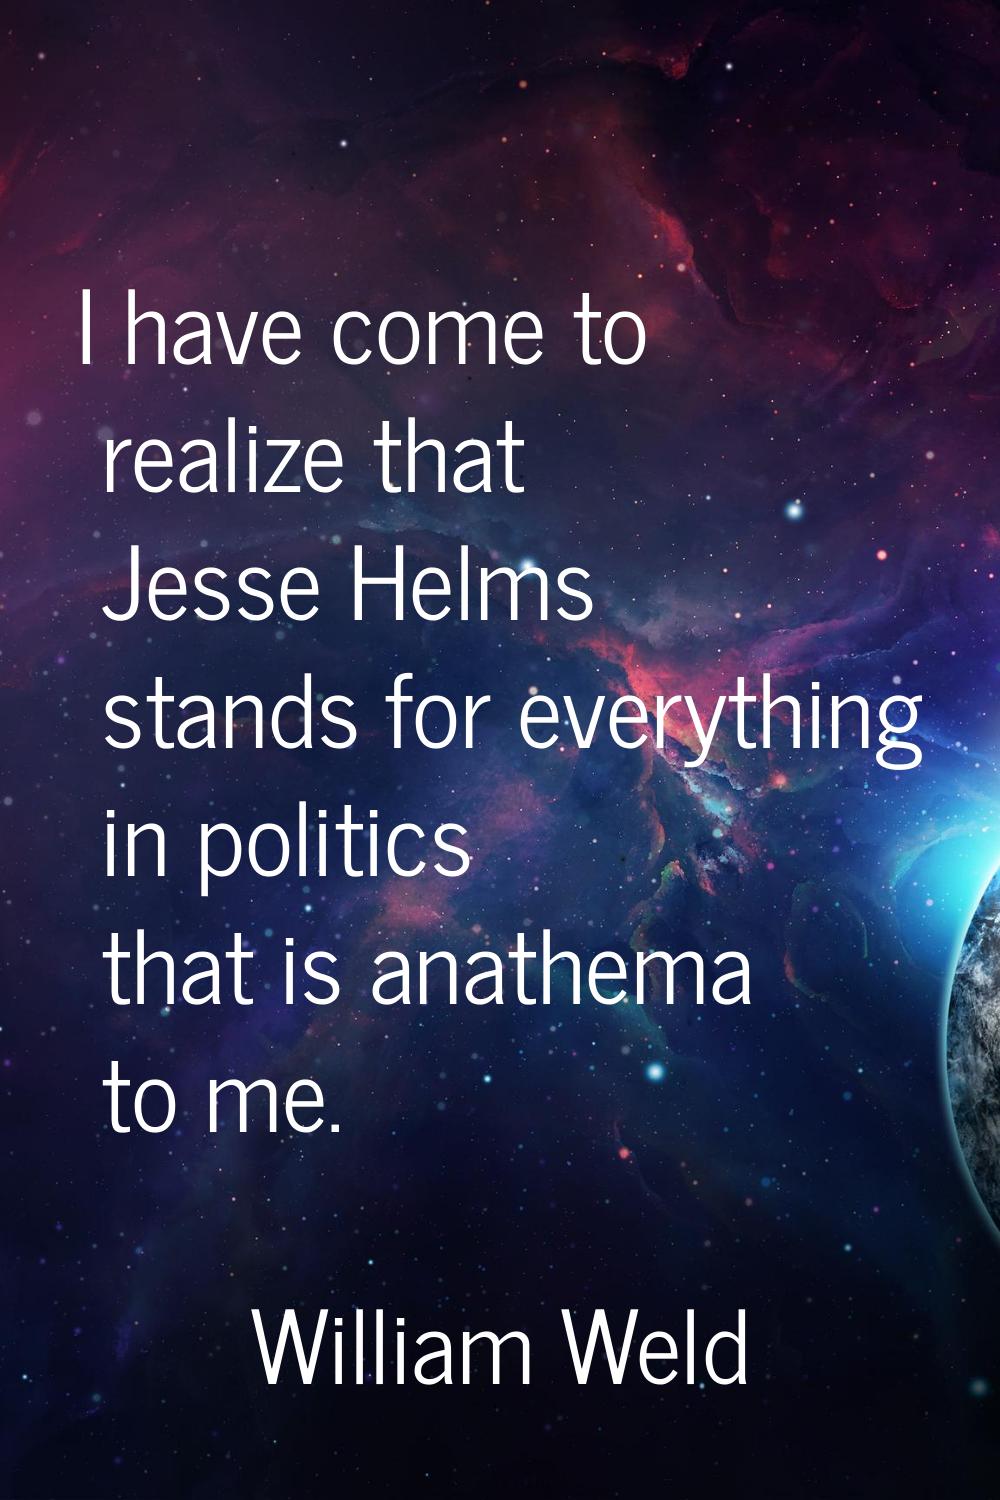 I have come to realize that Jesse Helms stands for everything in politics that is anathema to me.